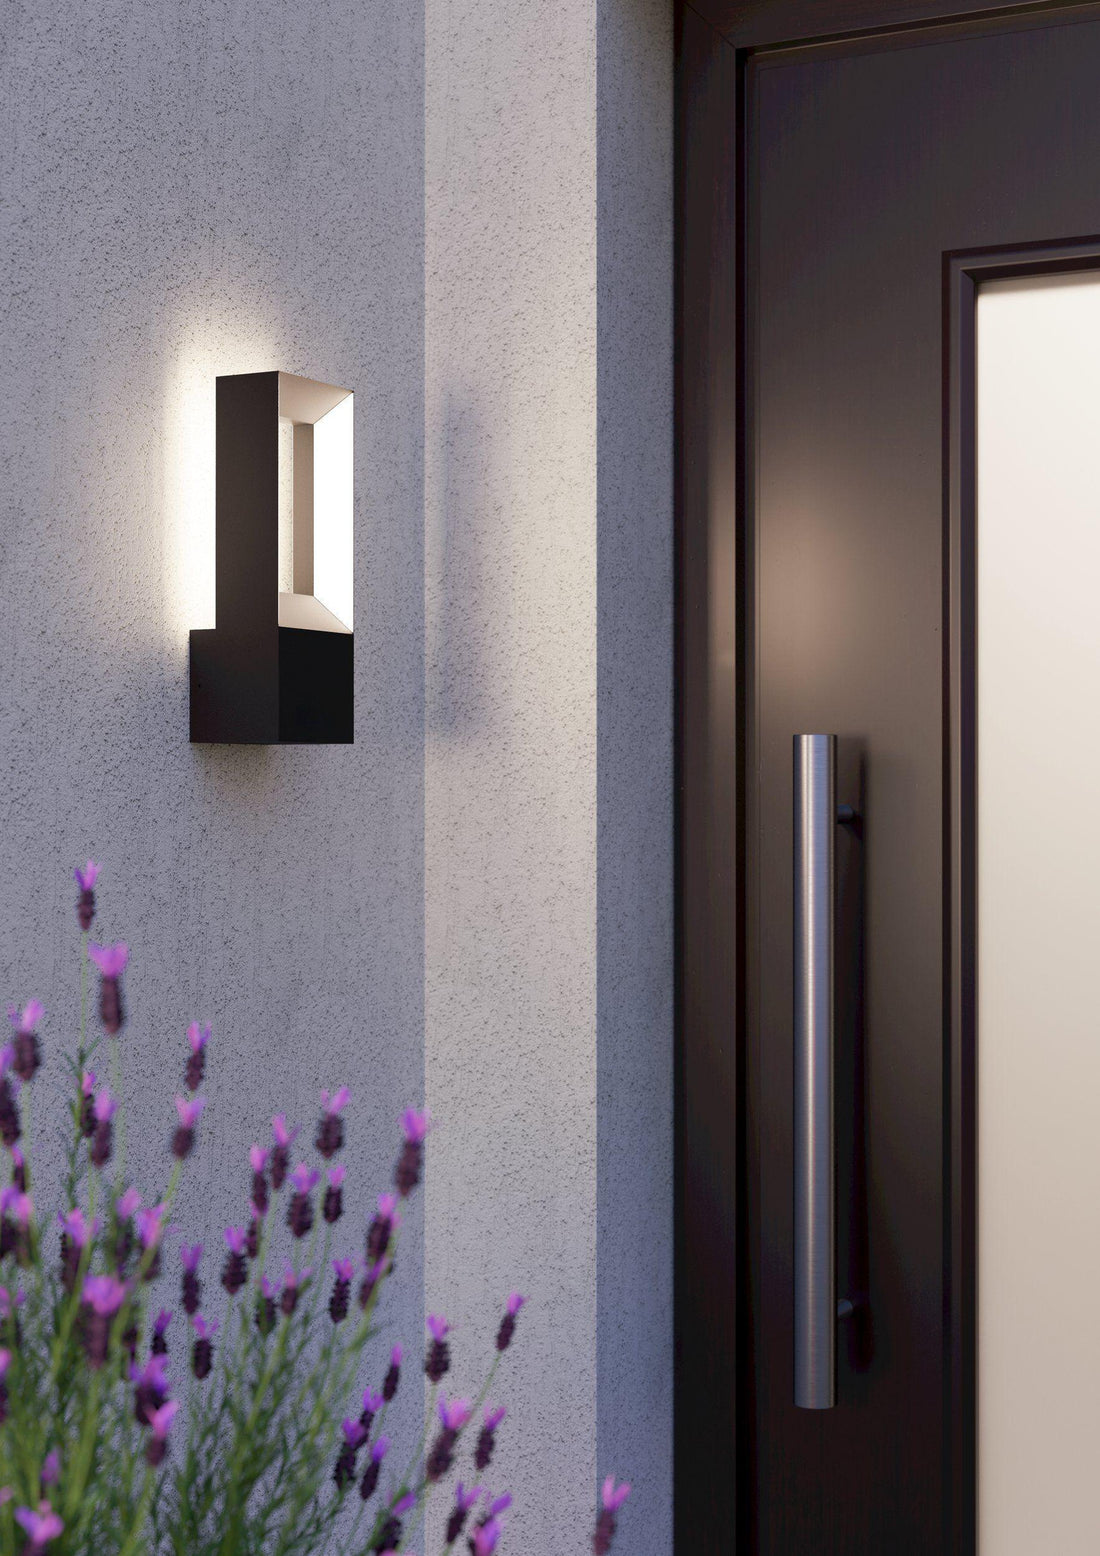 RIFORANO Outdoor Wall Light by The Light Library